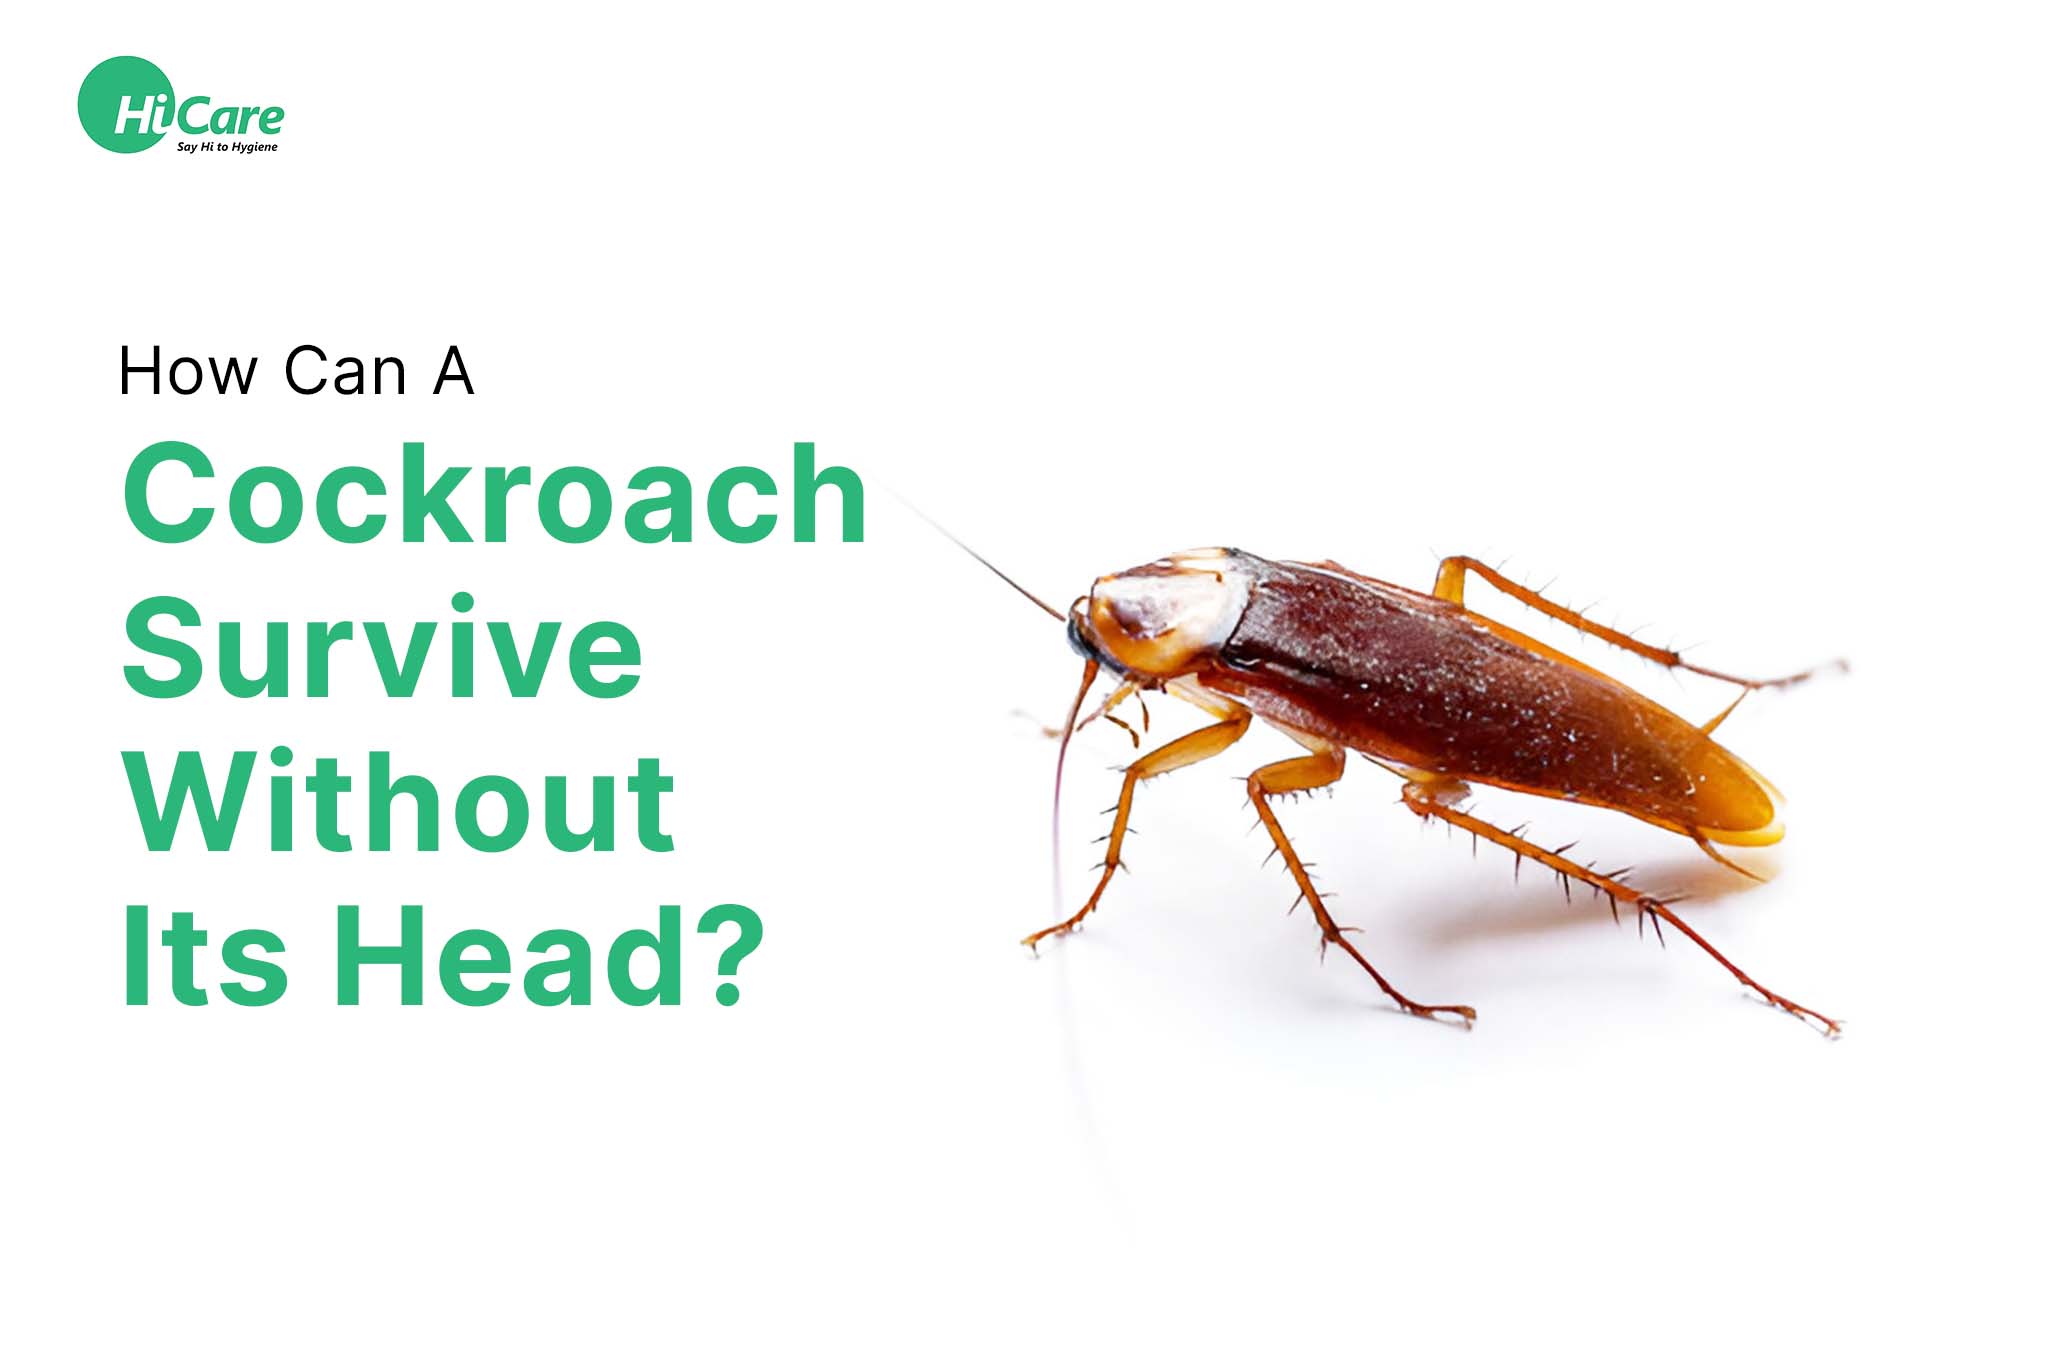 How Can A Cockroach Survive Without Its Head?